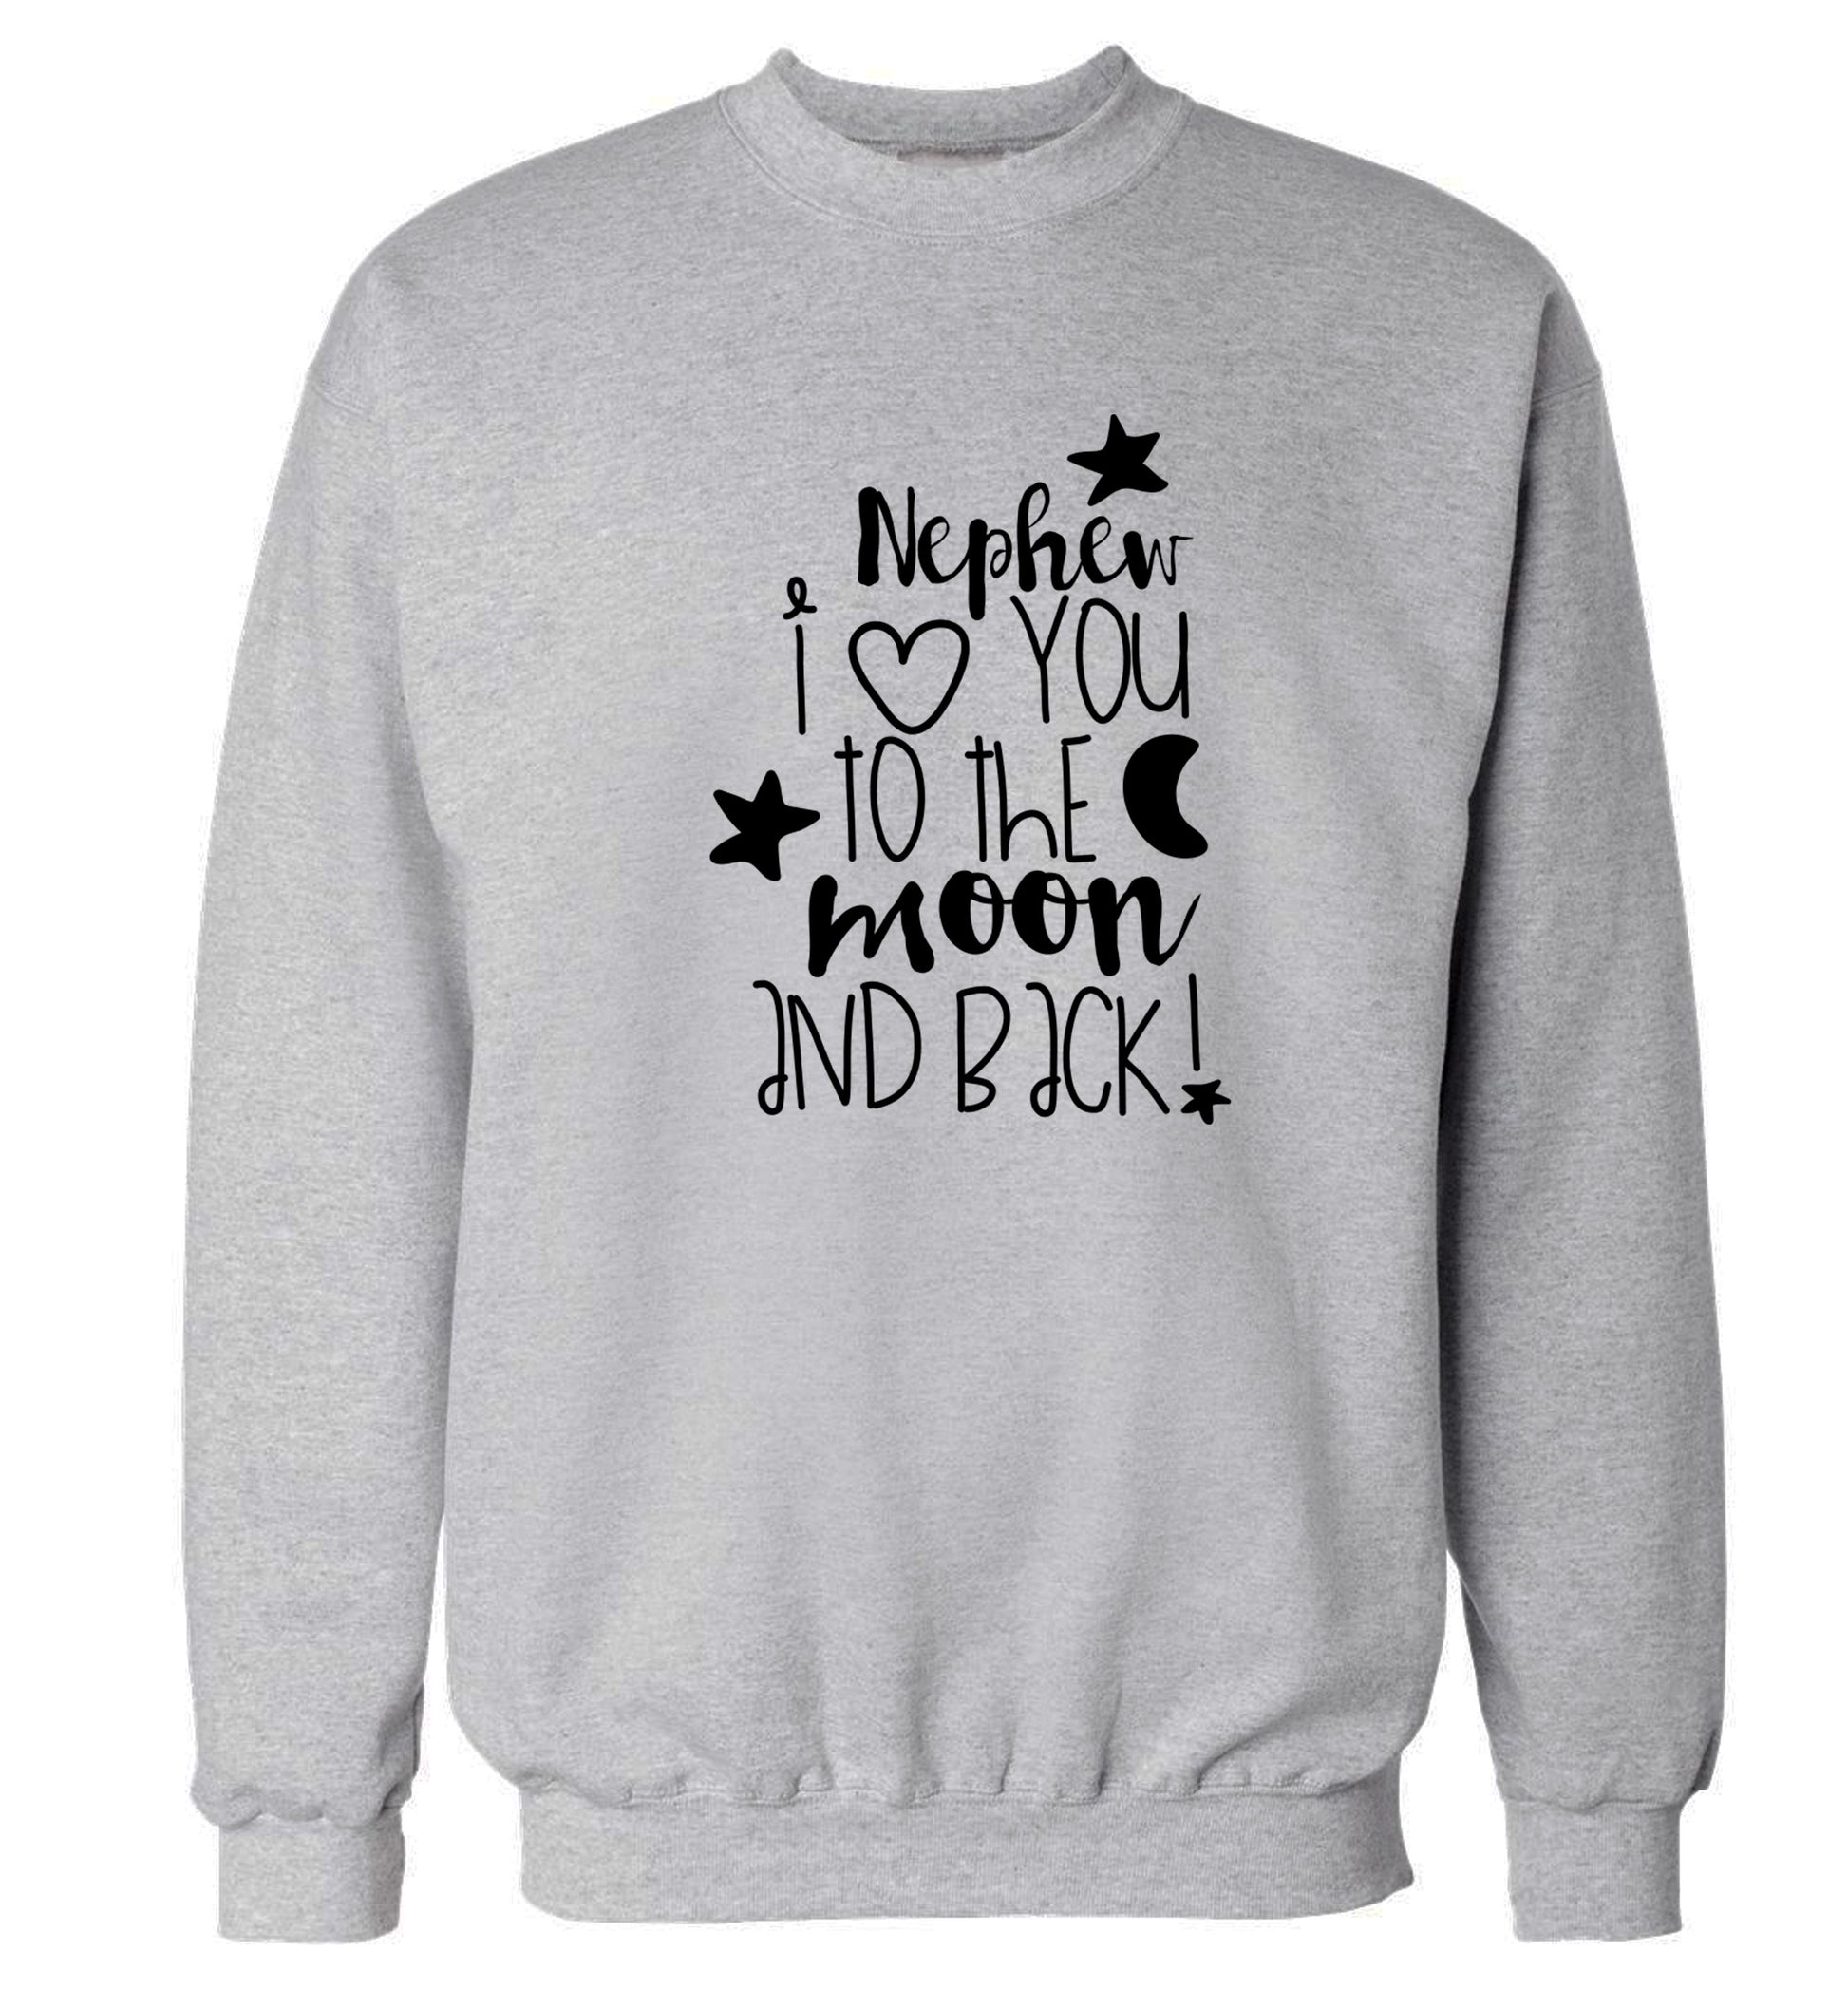 Nephew I love you to the moon and back Adult's unisex grey  sweater 2XL